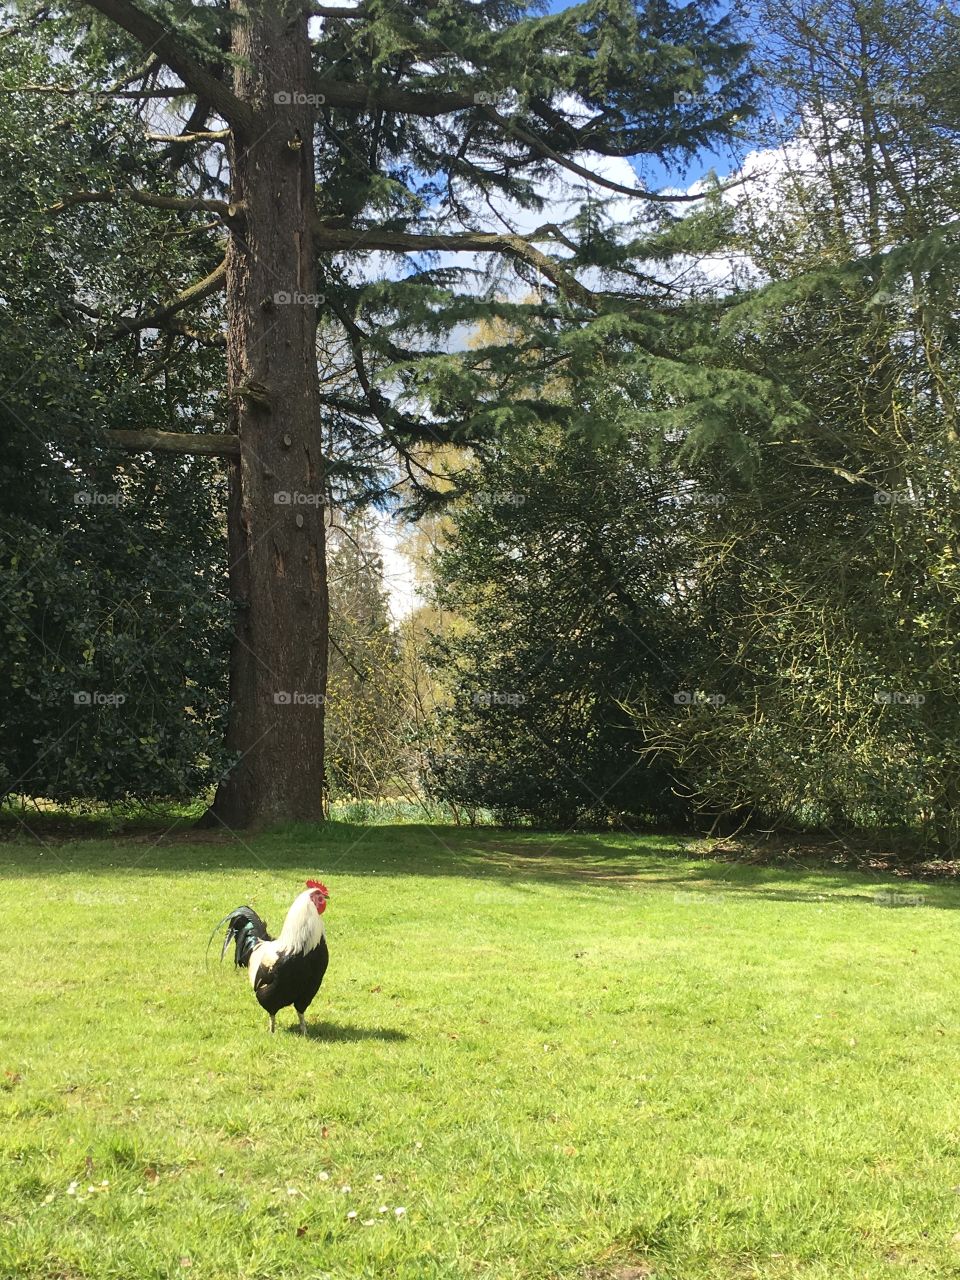 Rooster alone in the gardens